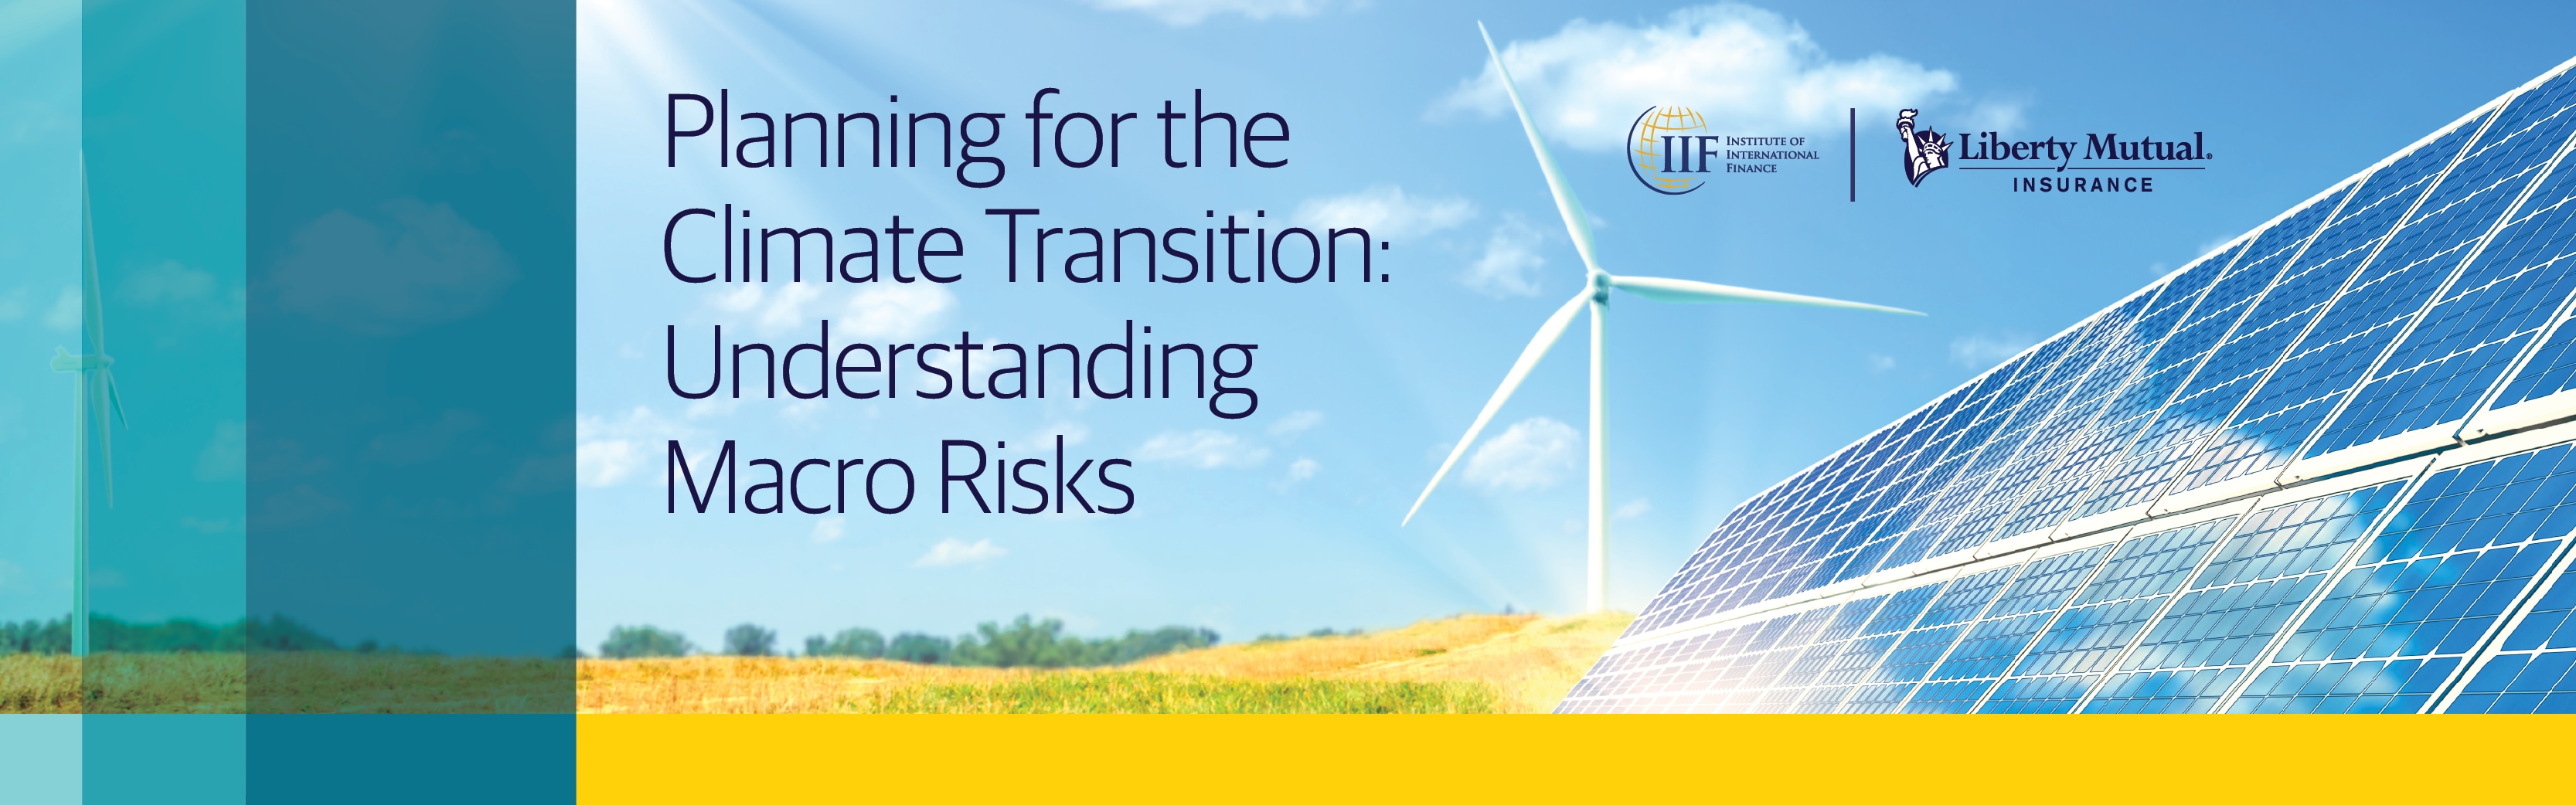 Planning for the Climate Transition: Understanding Macro Risks